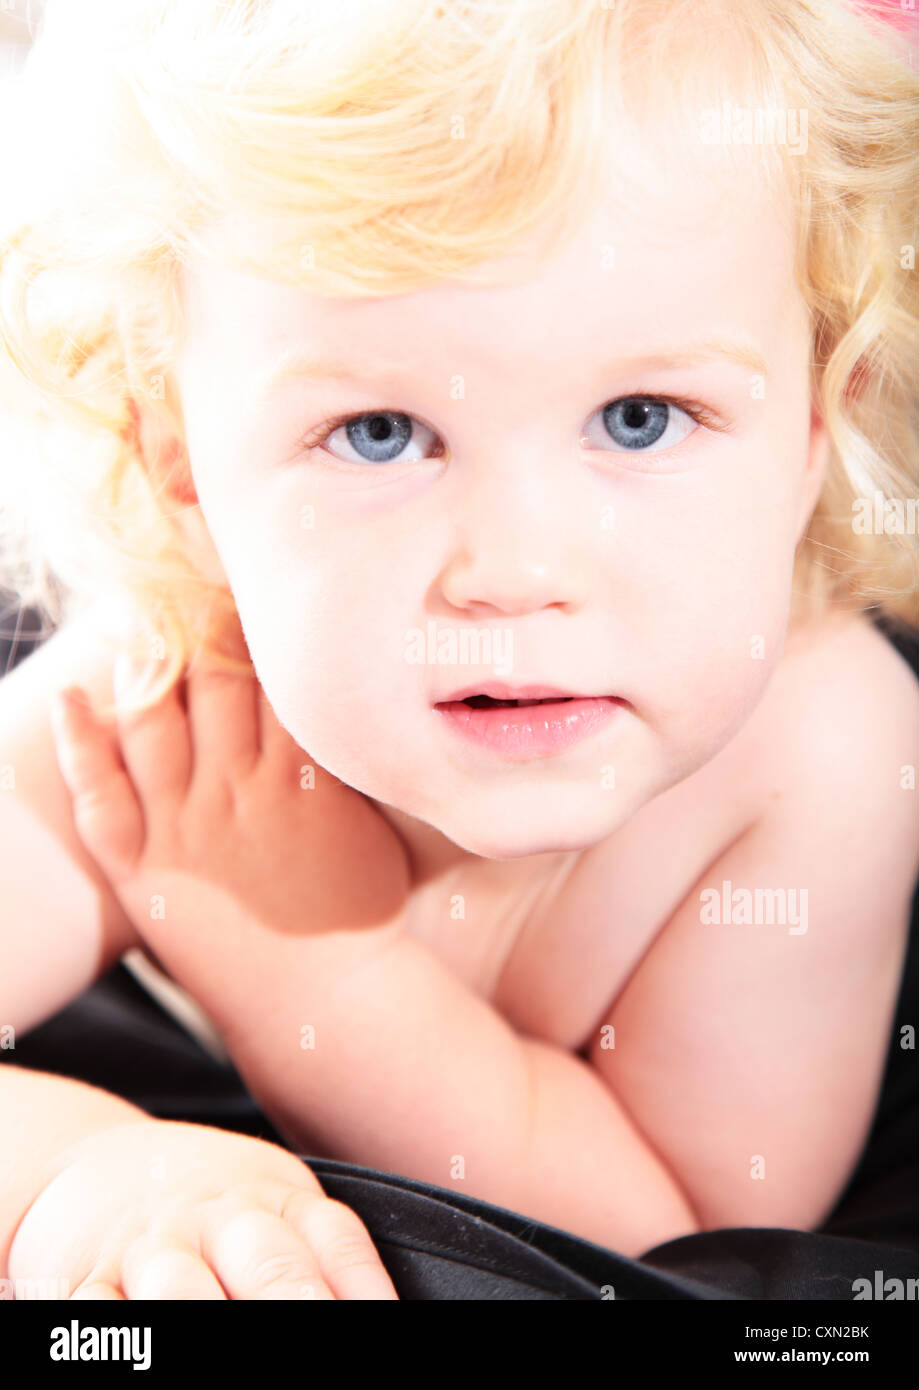 Cute Baby Boy With Curly Blond Hair And Blue Eyes Stock Photo